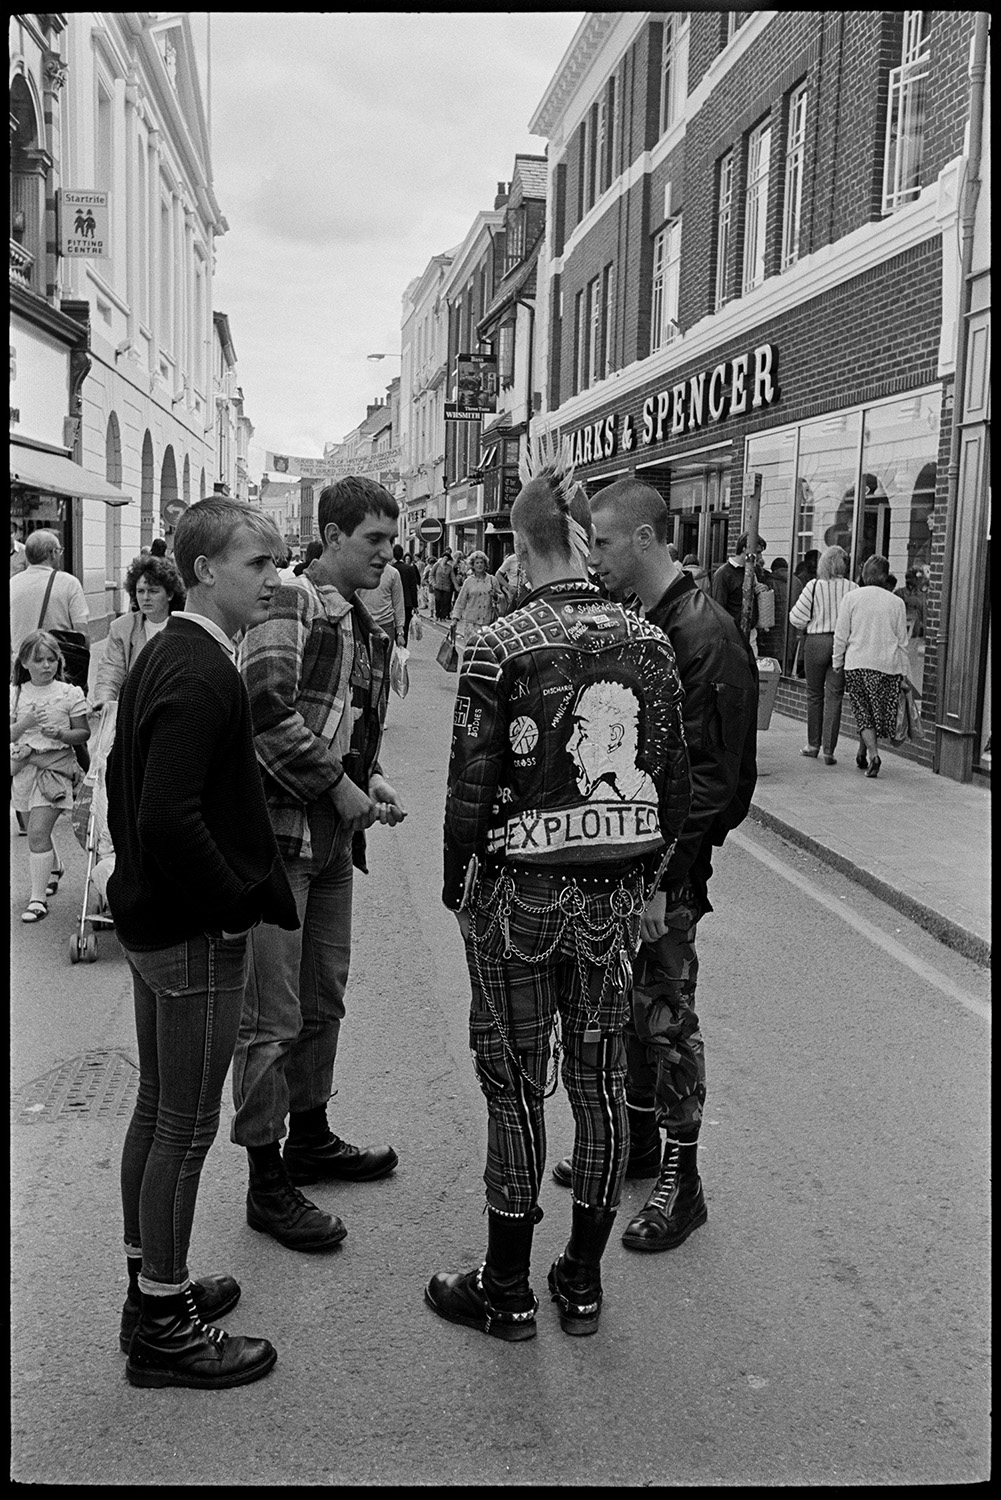 Three (very nice) skinheads or punks in town, one with mohican haircut. Good clothes.
[Four young men, or punks, standing in Barnstaple High Street. One is wearing tartan trousers, a leather jacket and a mohican haircut. Marks and Spencer shop front is visible in the background.]